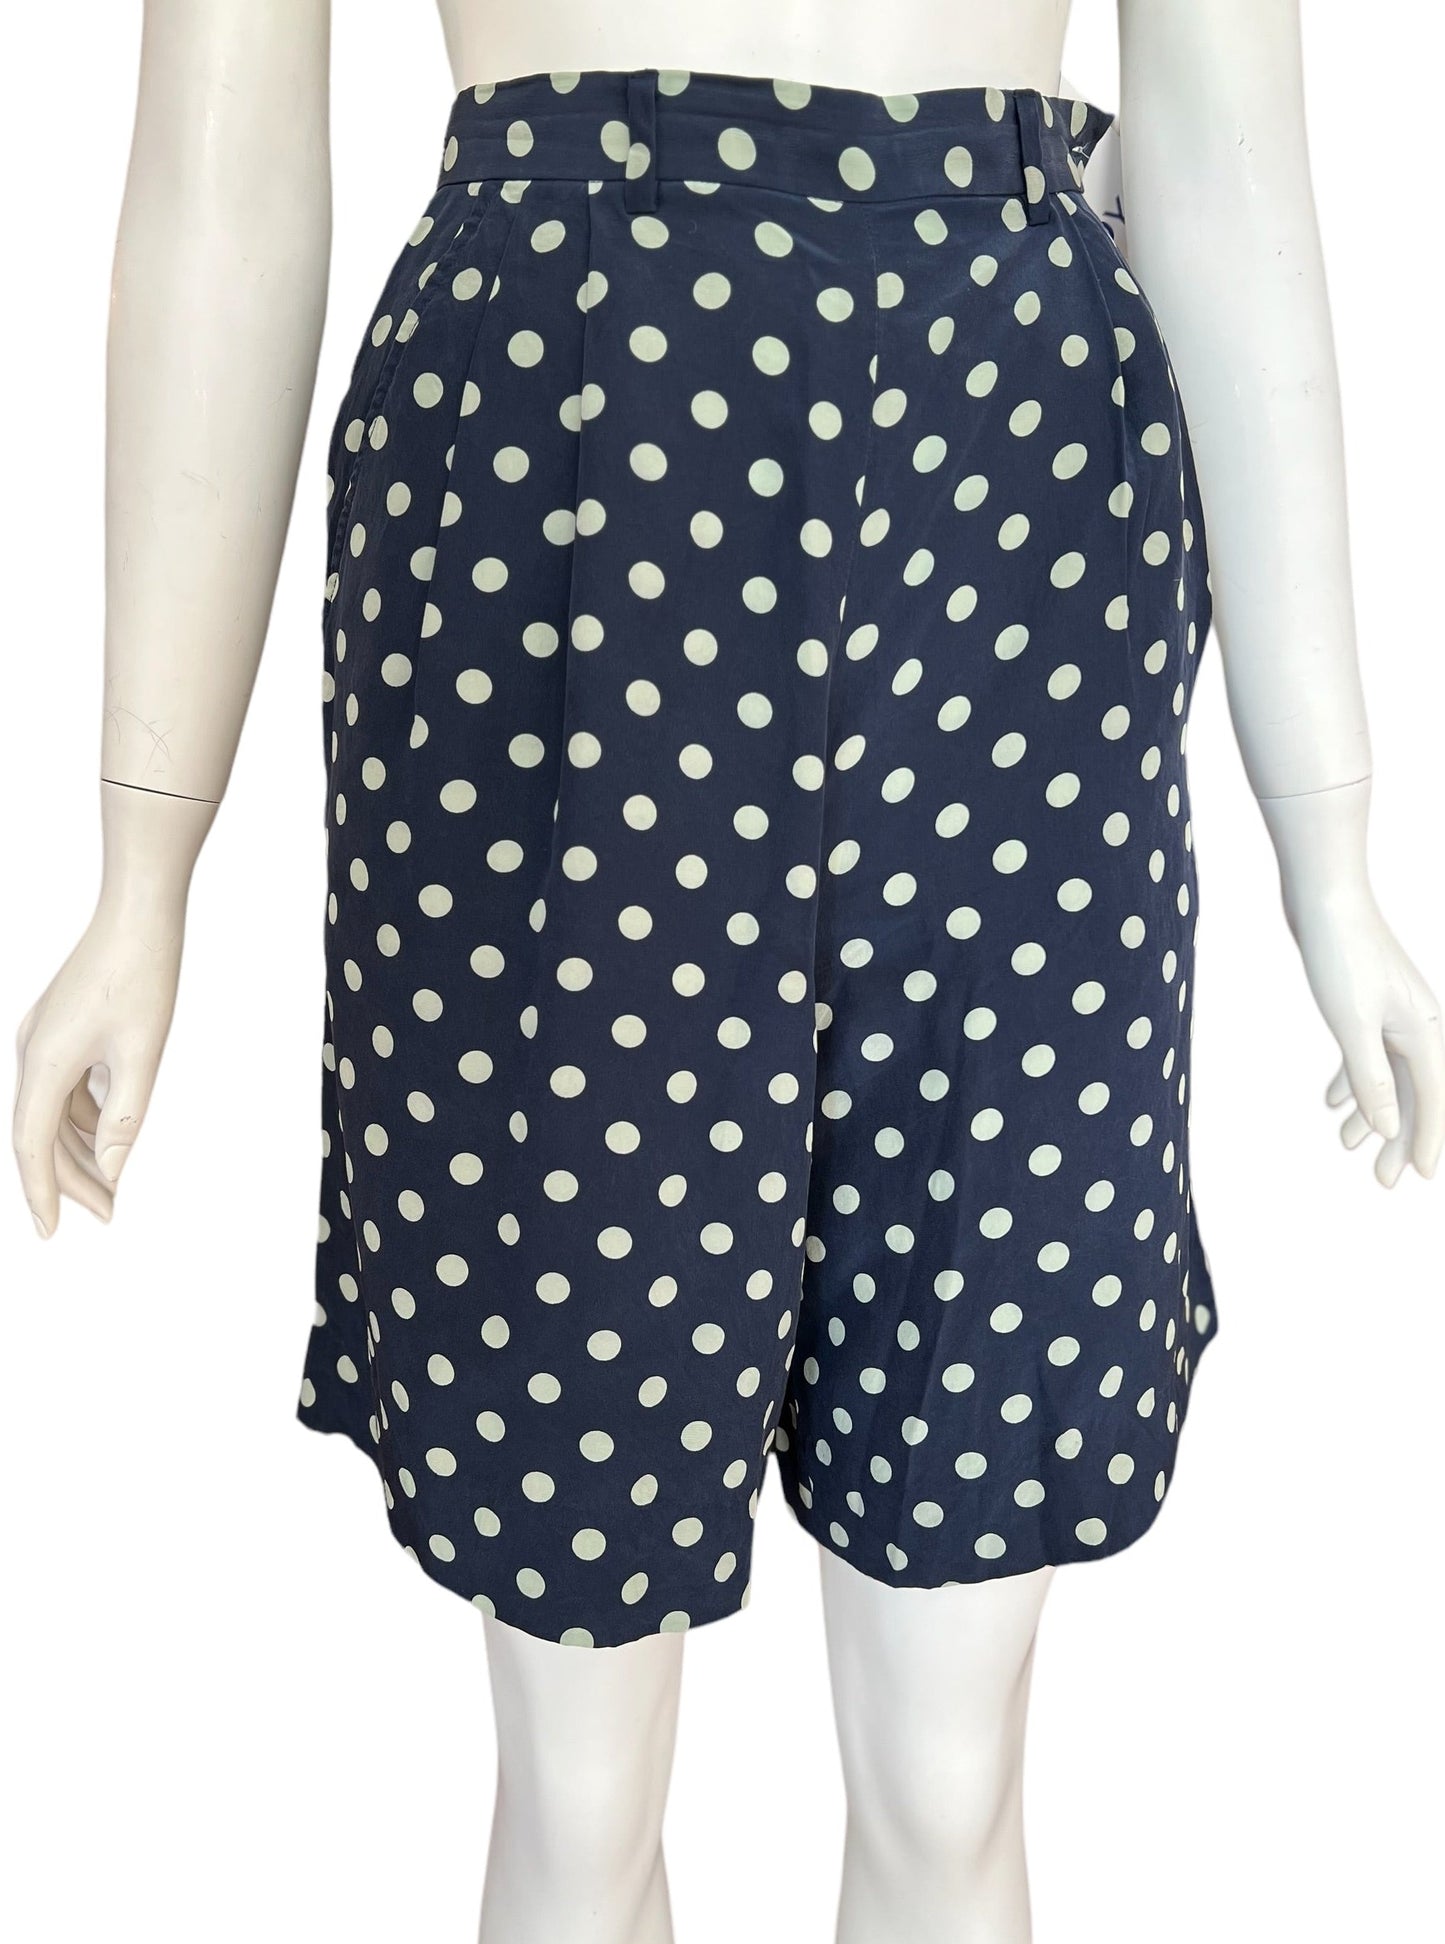 High waist, mid-length vintage silk shorts by ralph lauren.  Classic cut and polka dot print with button up closure on the side.